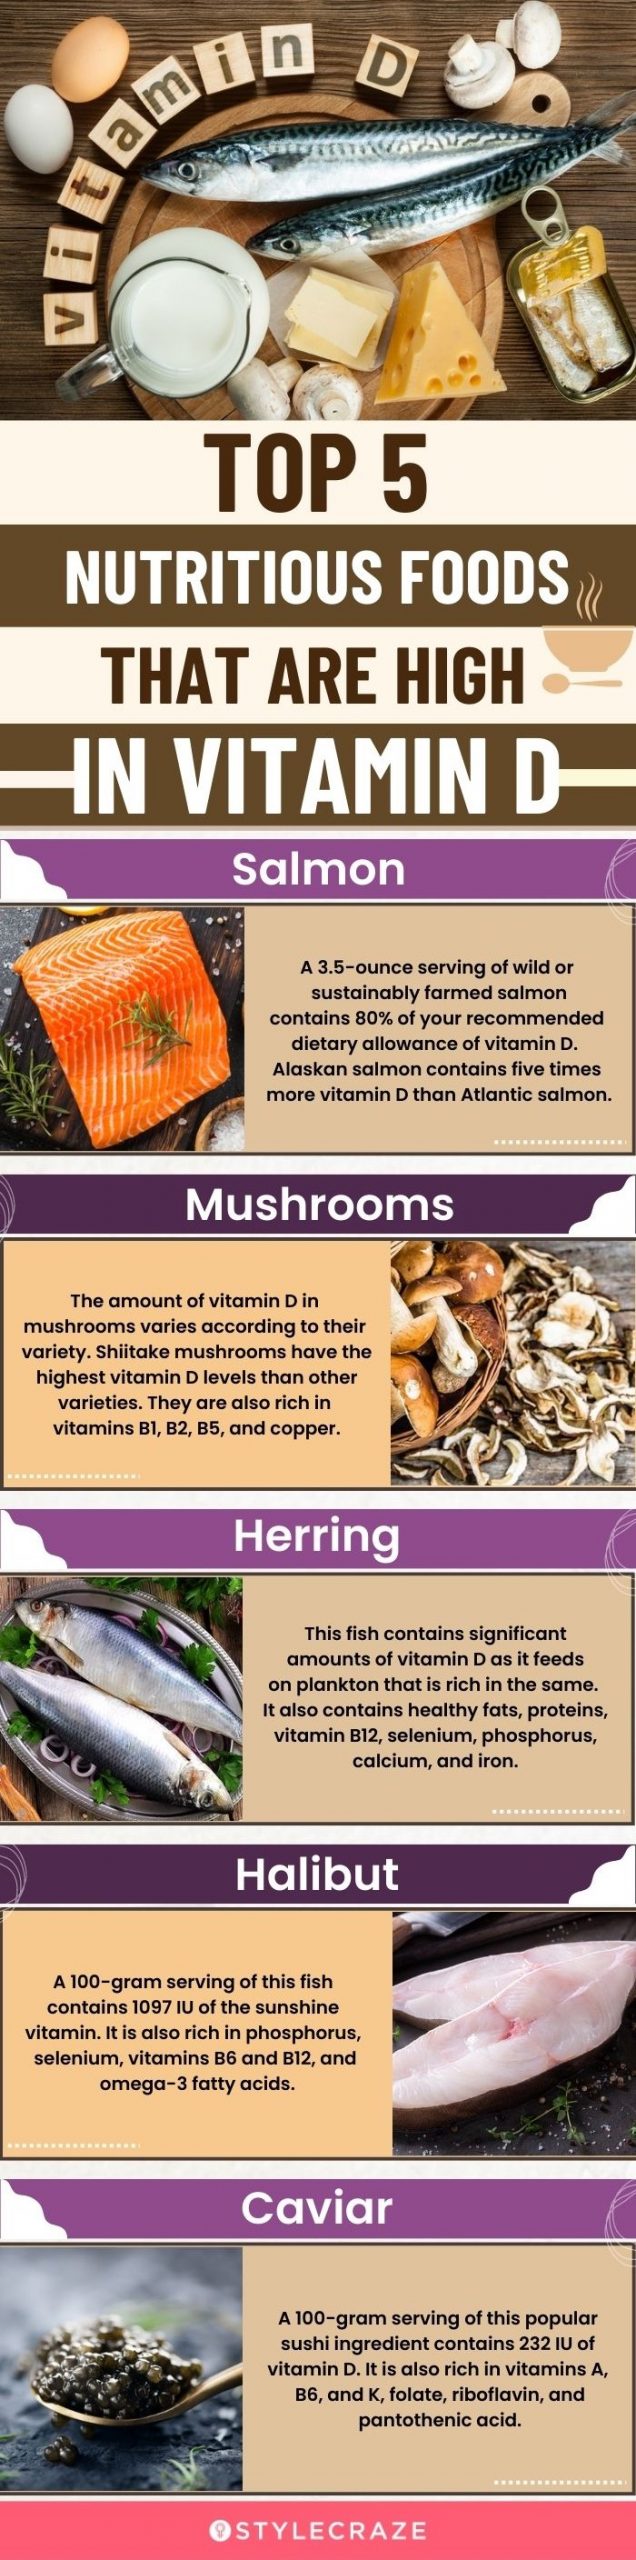 top 5 nutritious foods that are high in vitamin d (infographic)